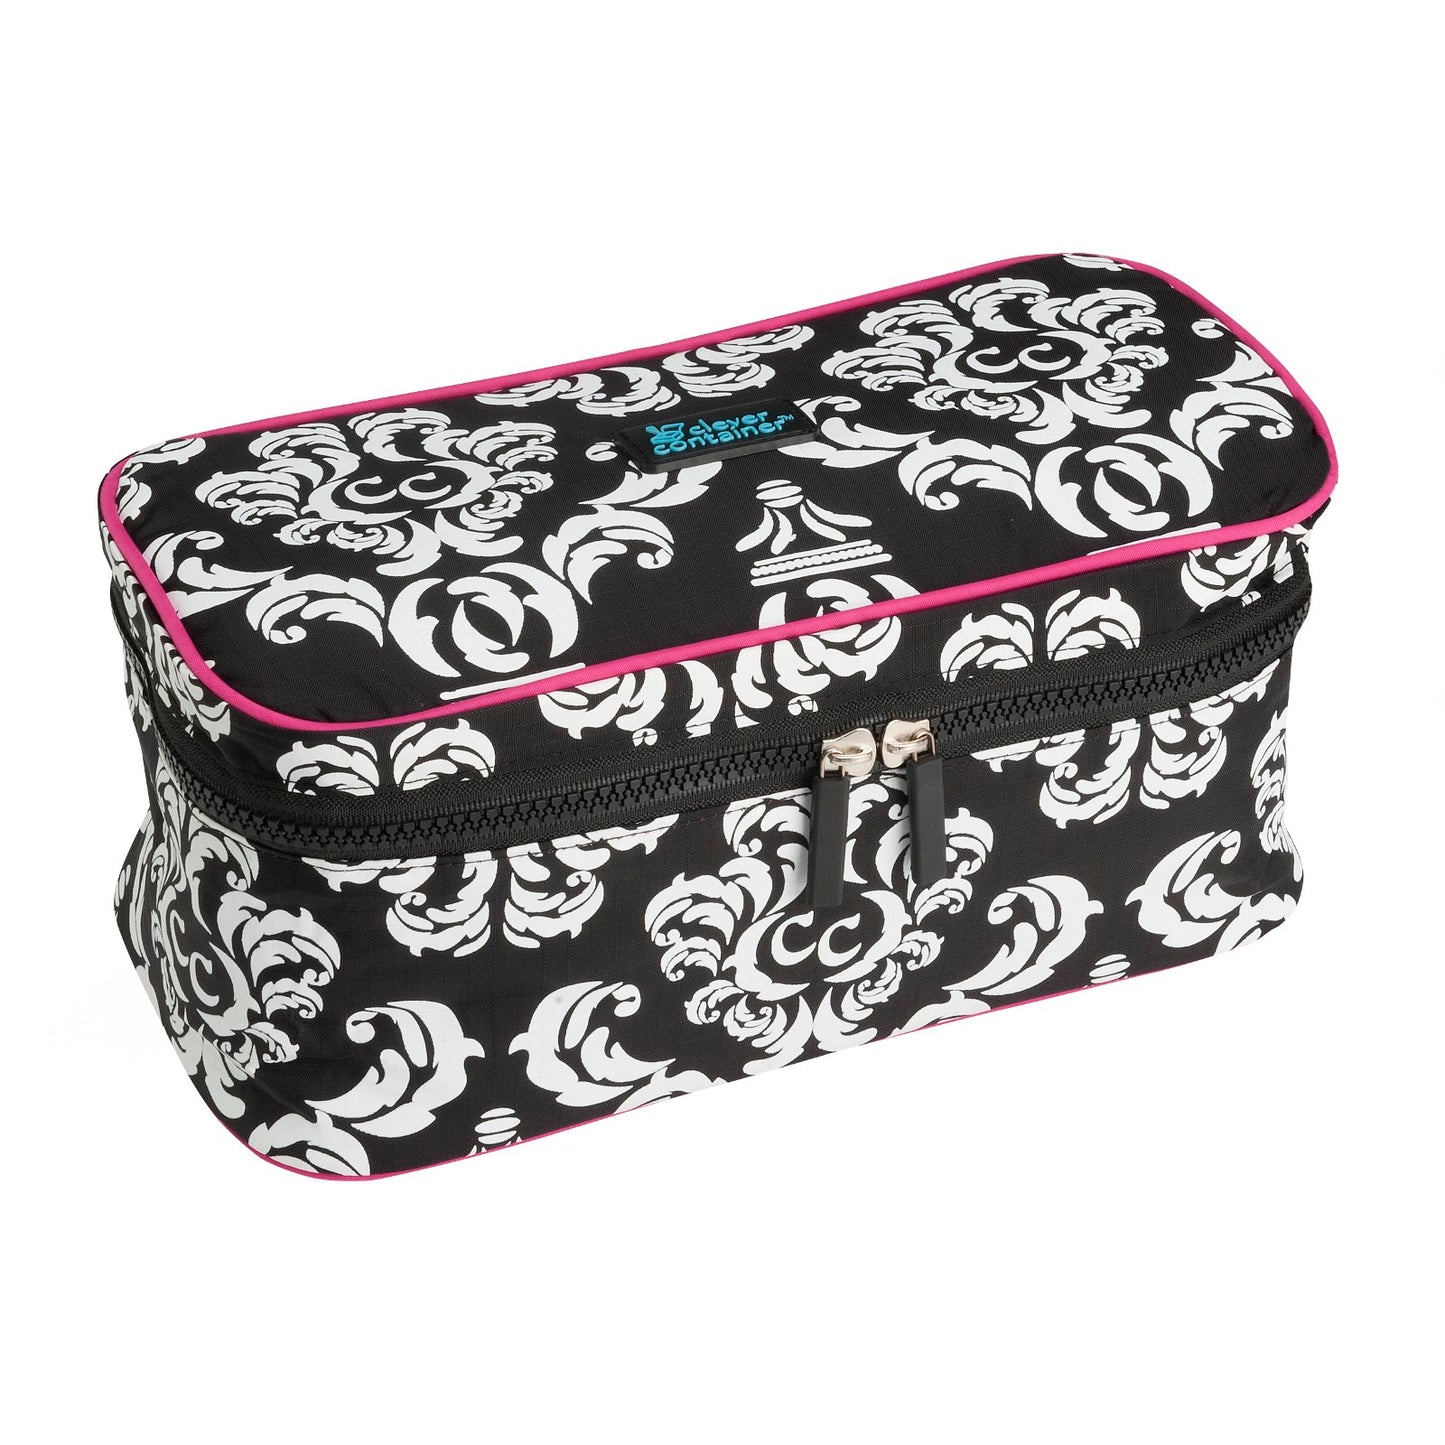 Tech & Toiletries Pouch- Damask with Pink